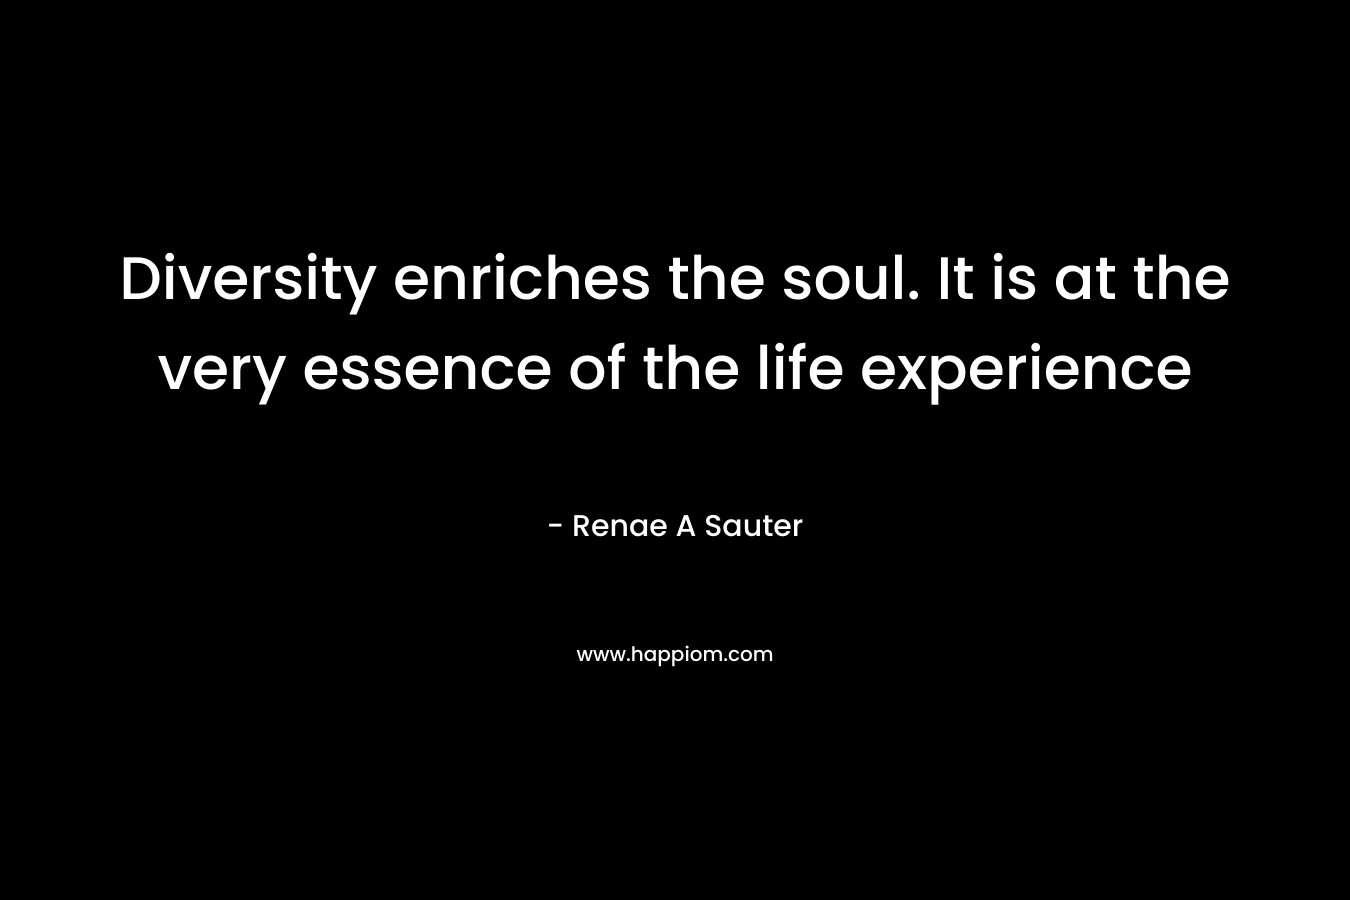 Diversity enriches the soul. It is at the very essence of the life experience